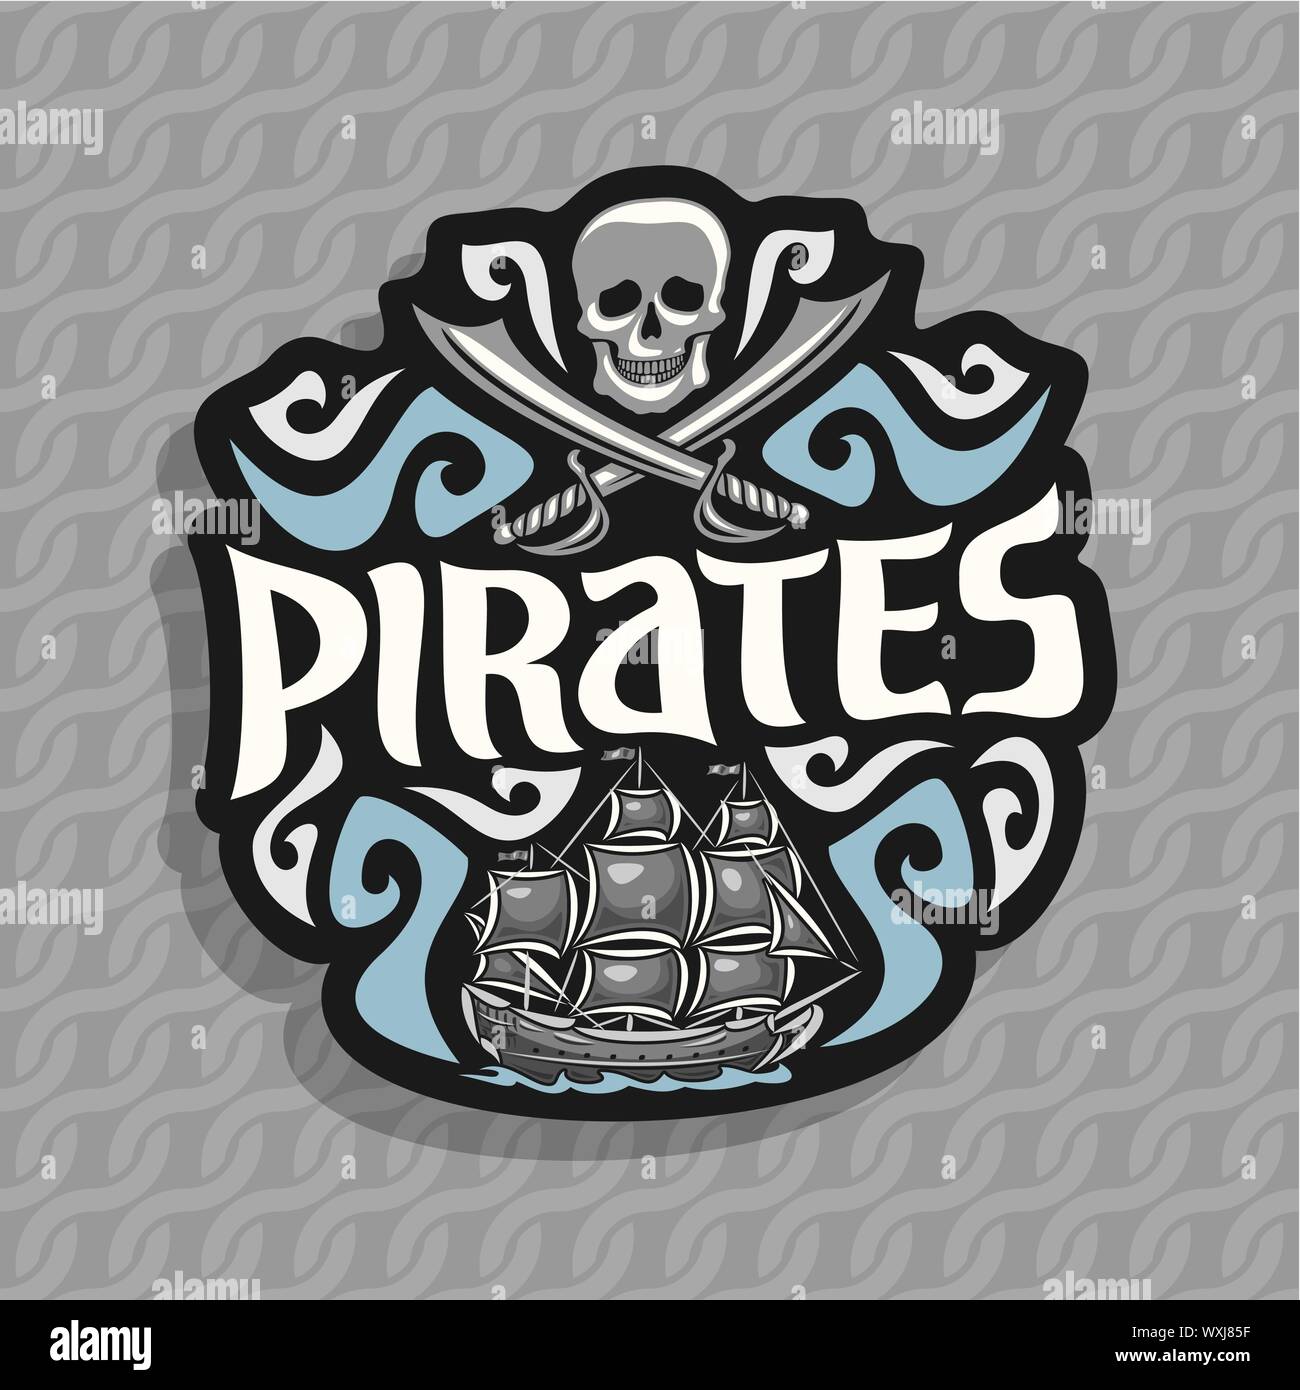 Vector logo for Pirates: grey skull and crossed sabers and old sails ship with jolly roger flag on ropes seamless pattern. Stock Vector